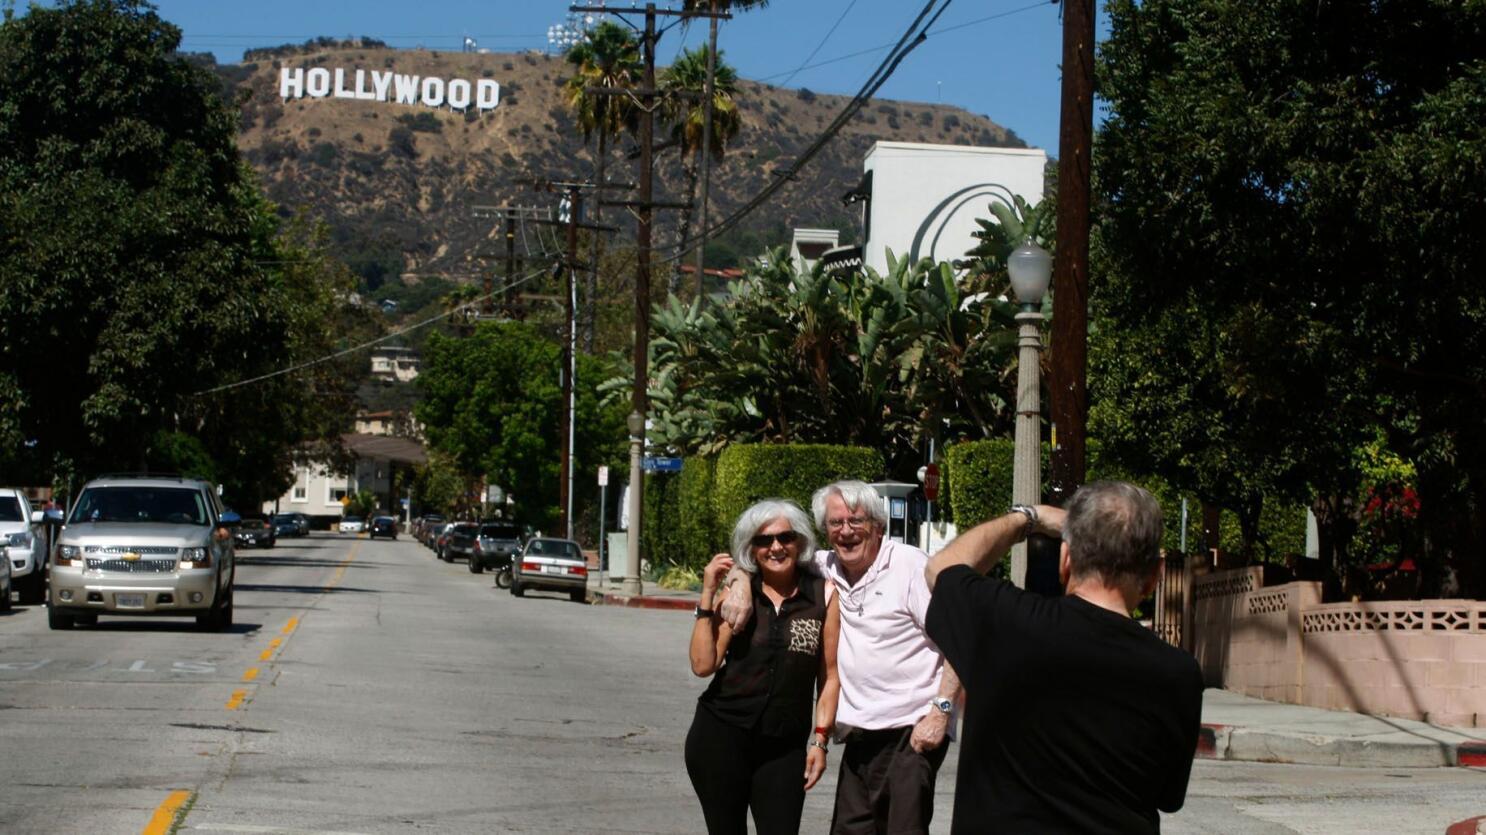 About Hollywood Hills  Schools, Demographics, Things to Do 